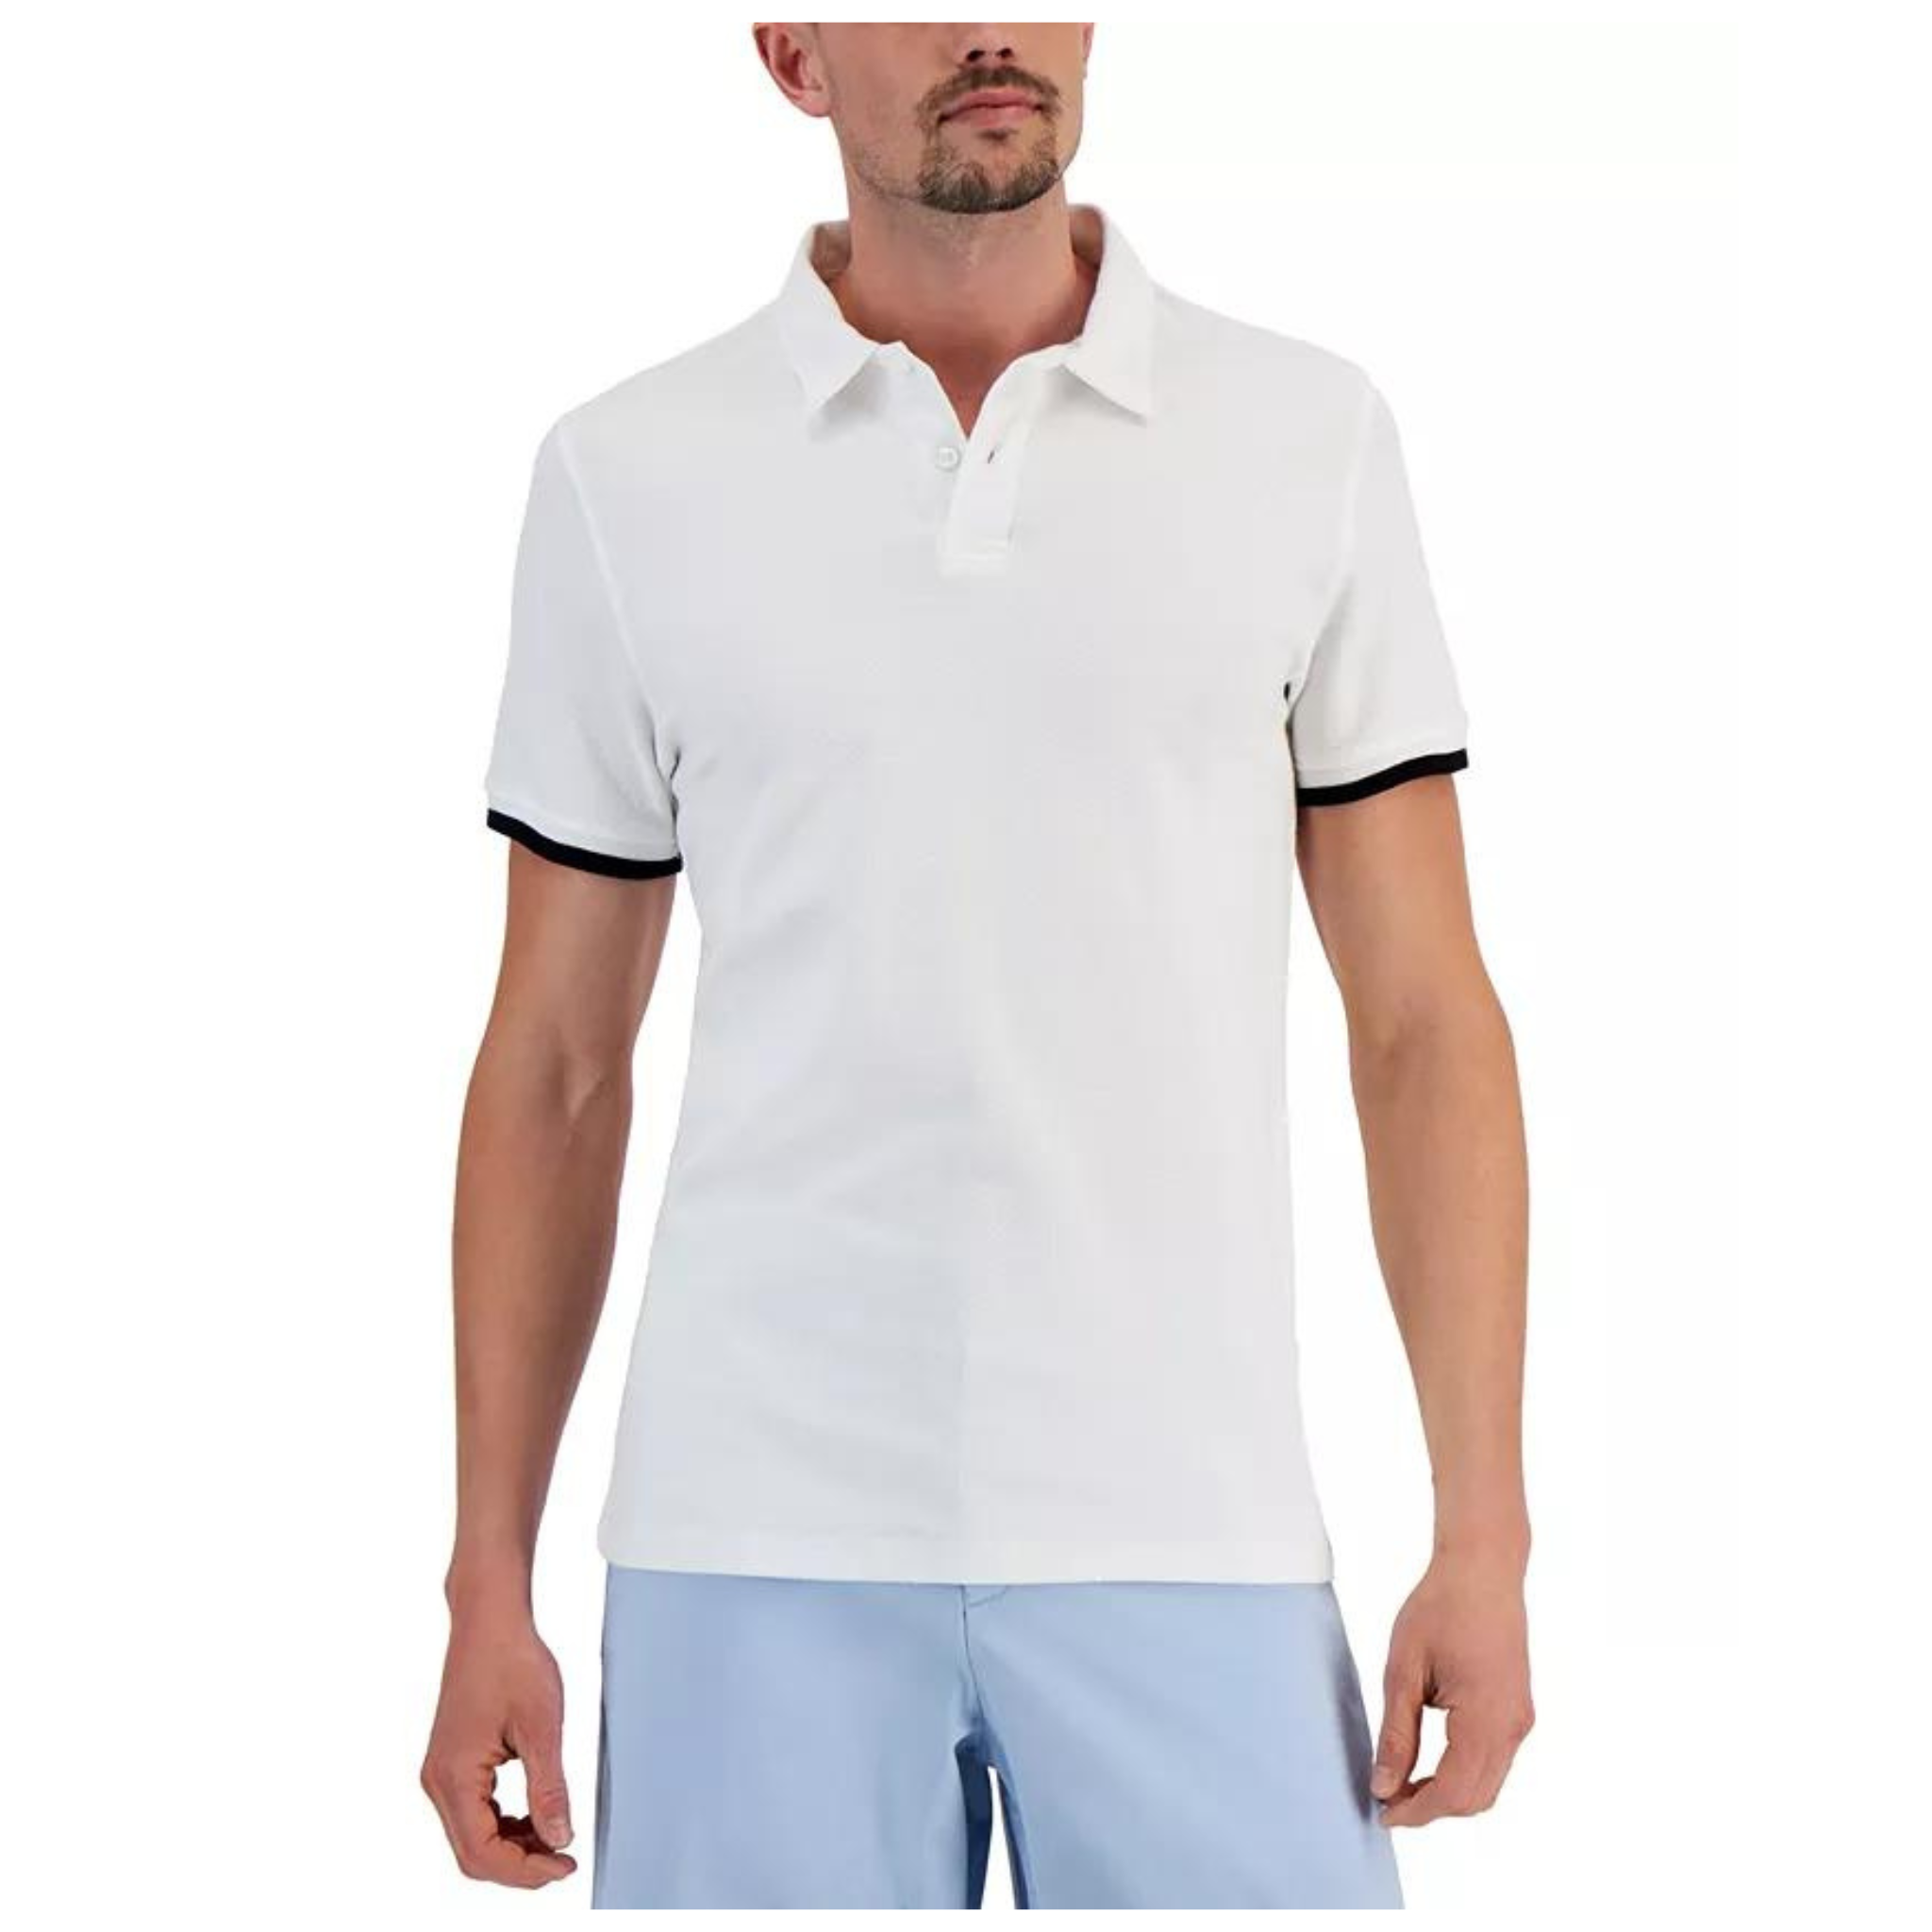 Men's Dress Shirts, Polos, And T-Shirts On Sale